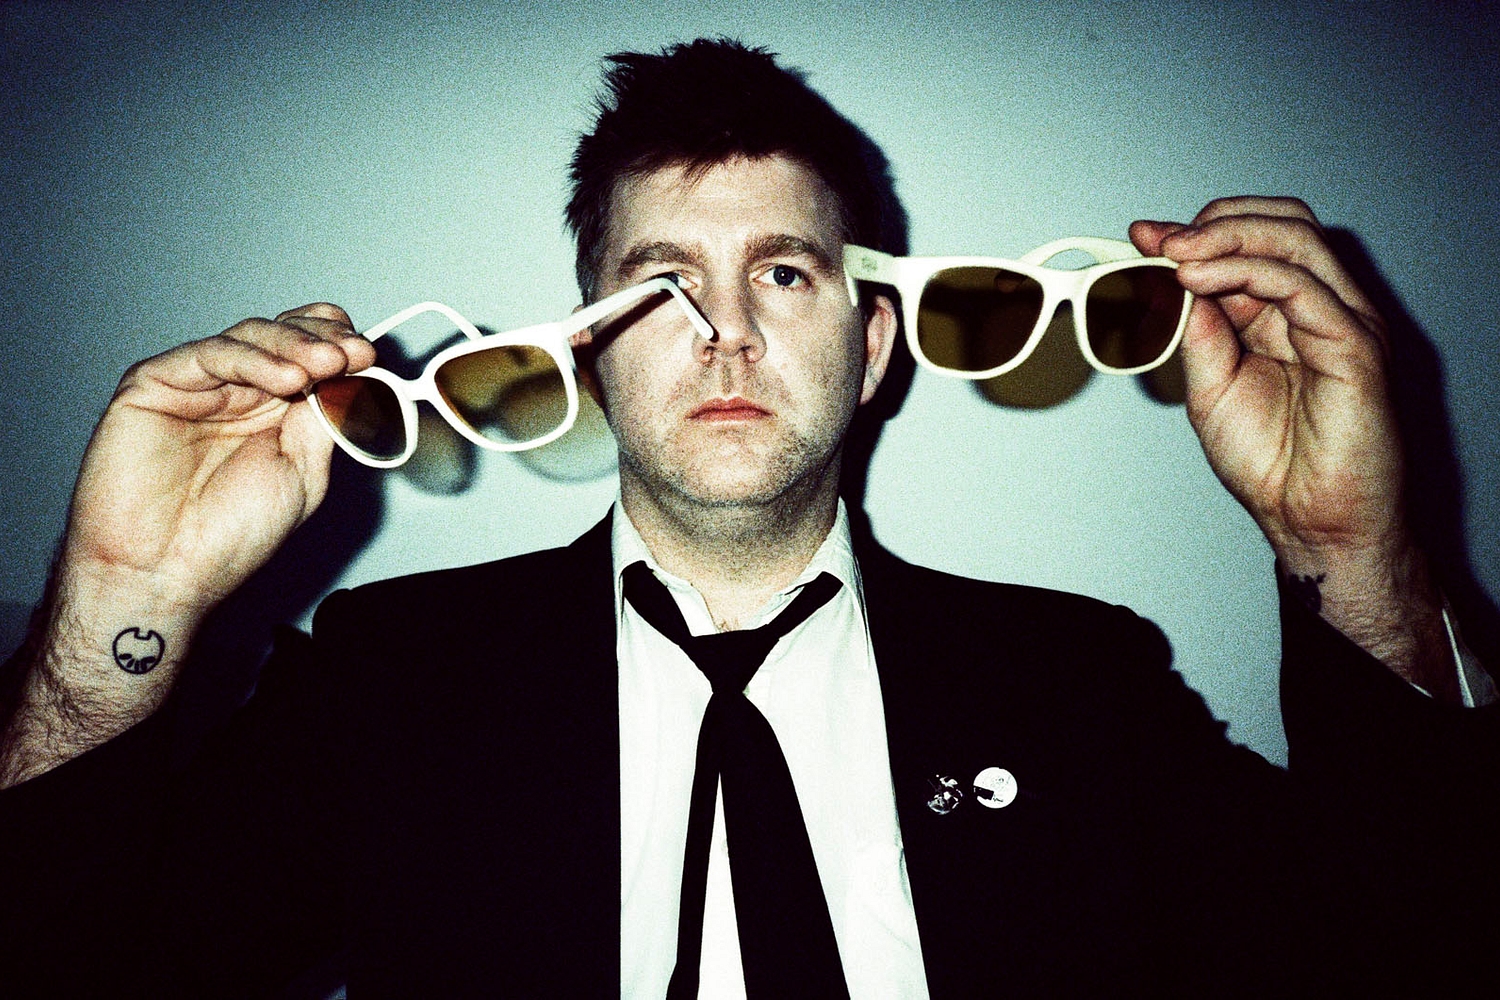 All My Friends: the faces who made LCD Soundsystem's 'Sound of Silver'